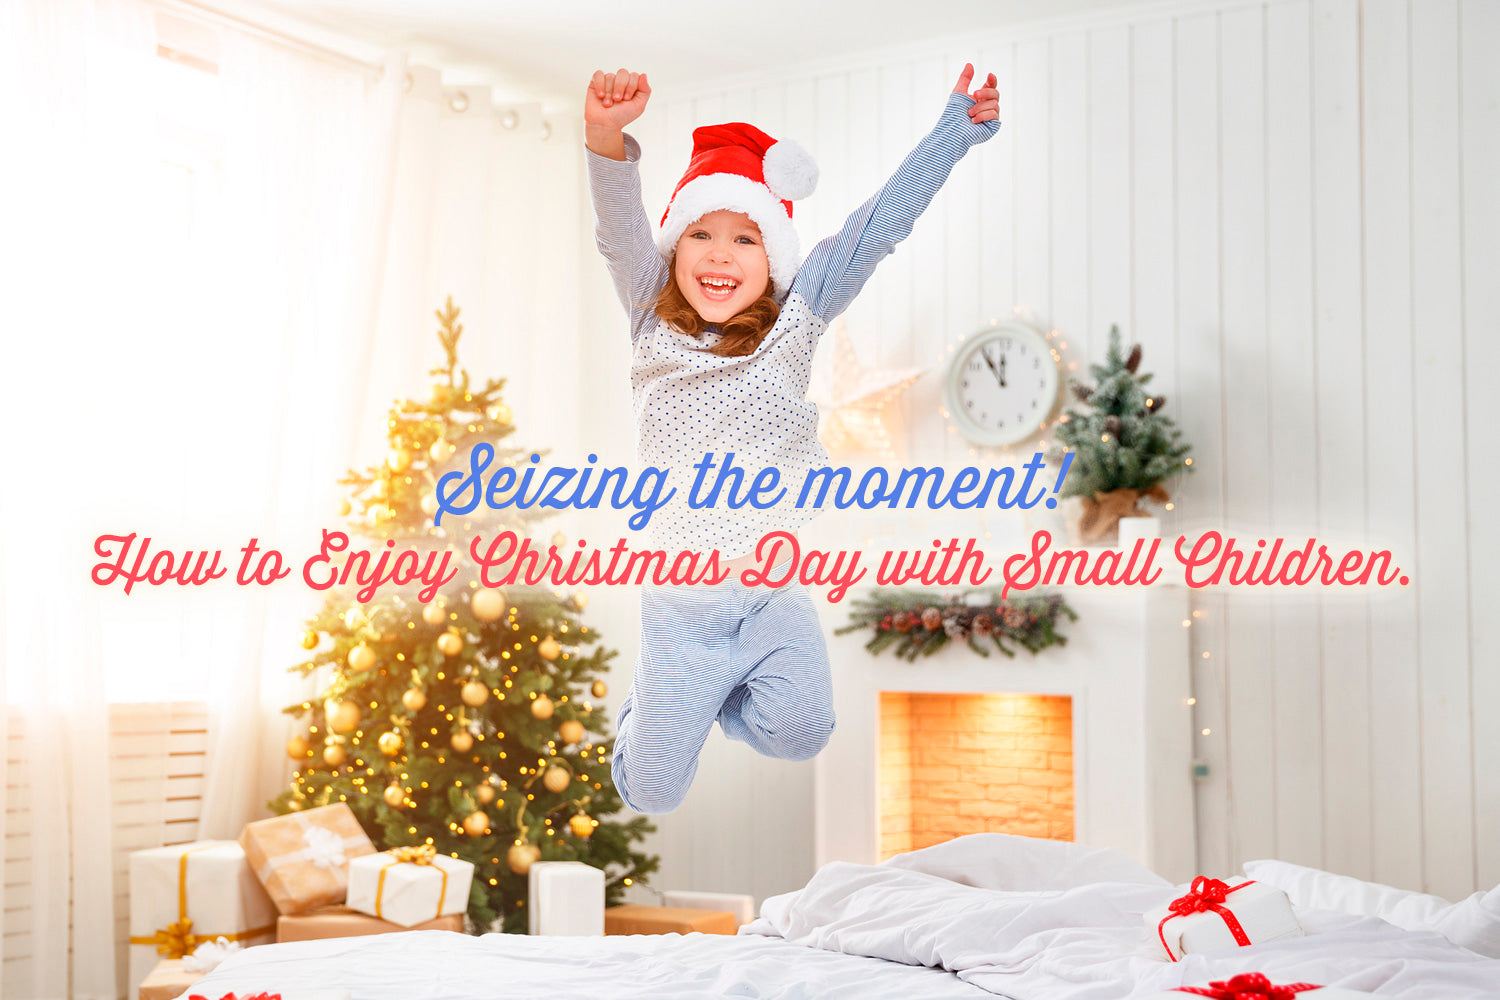 How to Enjoy Christmas Day with Small Children